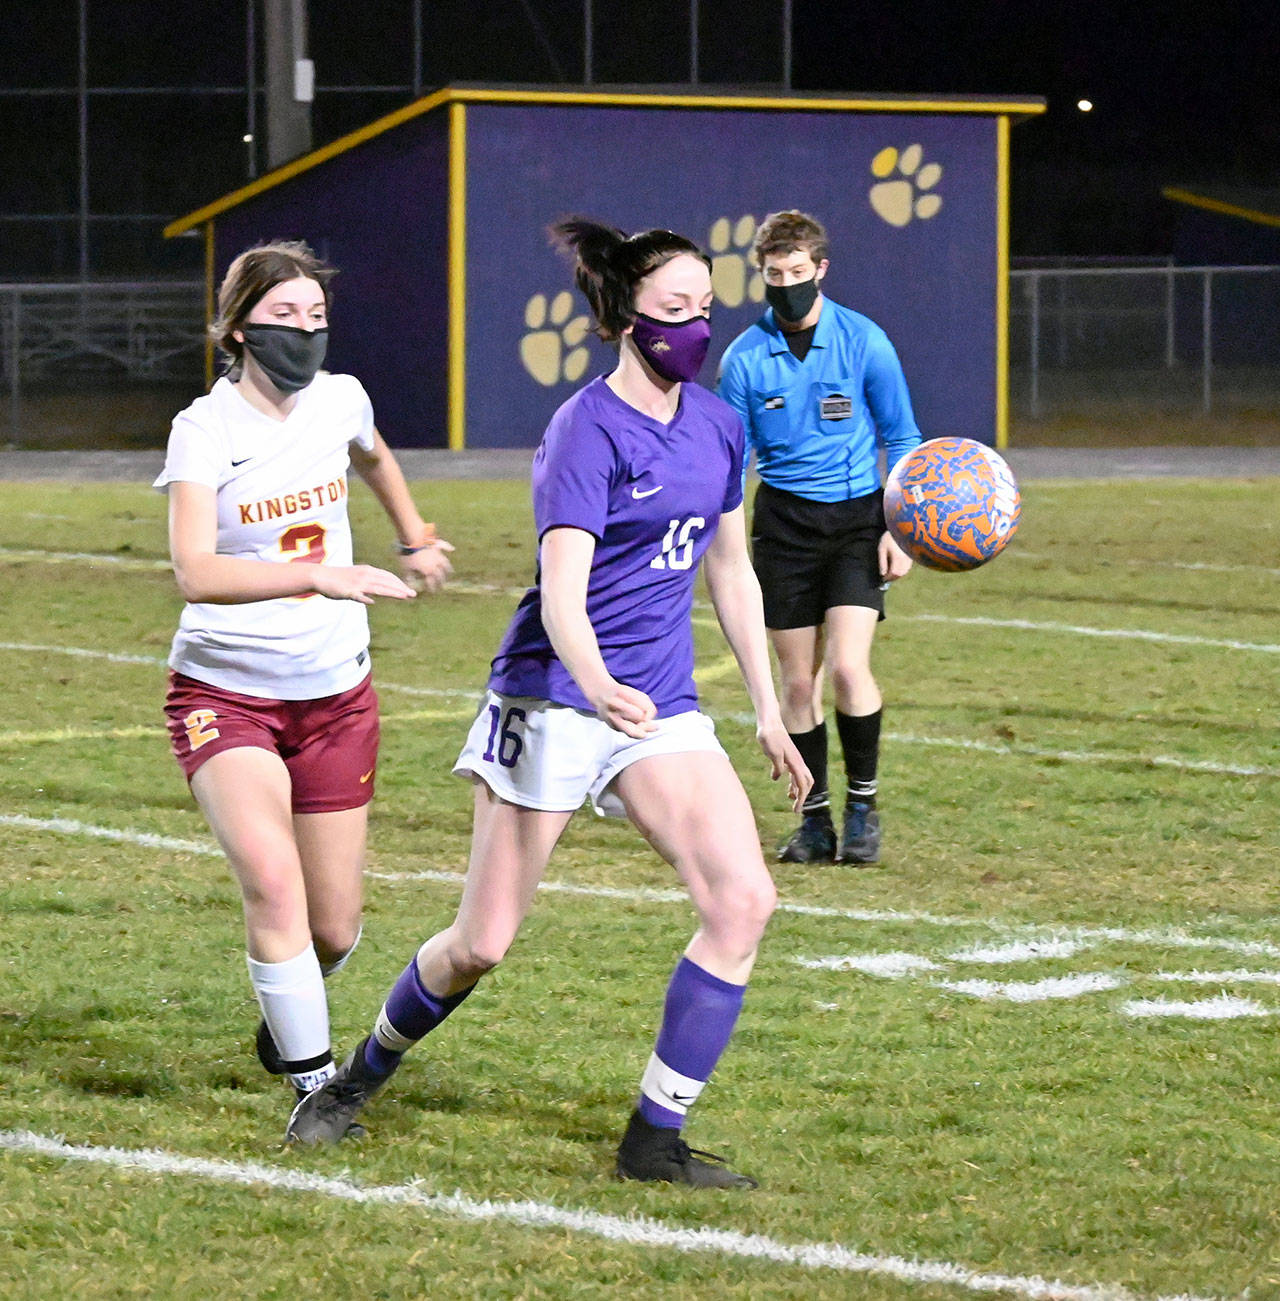 Michael Dashiell/Olympic Peninsula News Group Sequim midfielder Abby Schroeder, center, vies with Kingston Buccaneer Mandy Dormaier as they chase down a ball in the first half of Sequim’s 2-1 win over Kingston on Feb. 18.